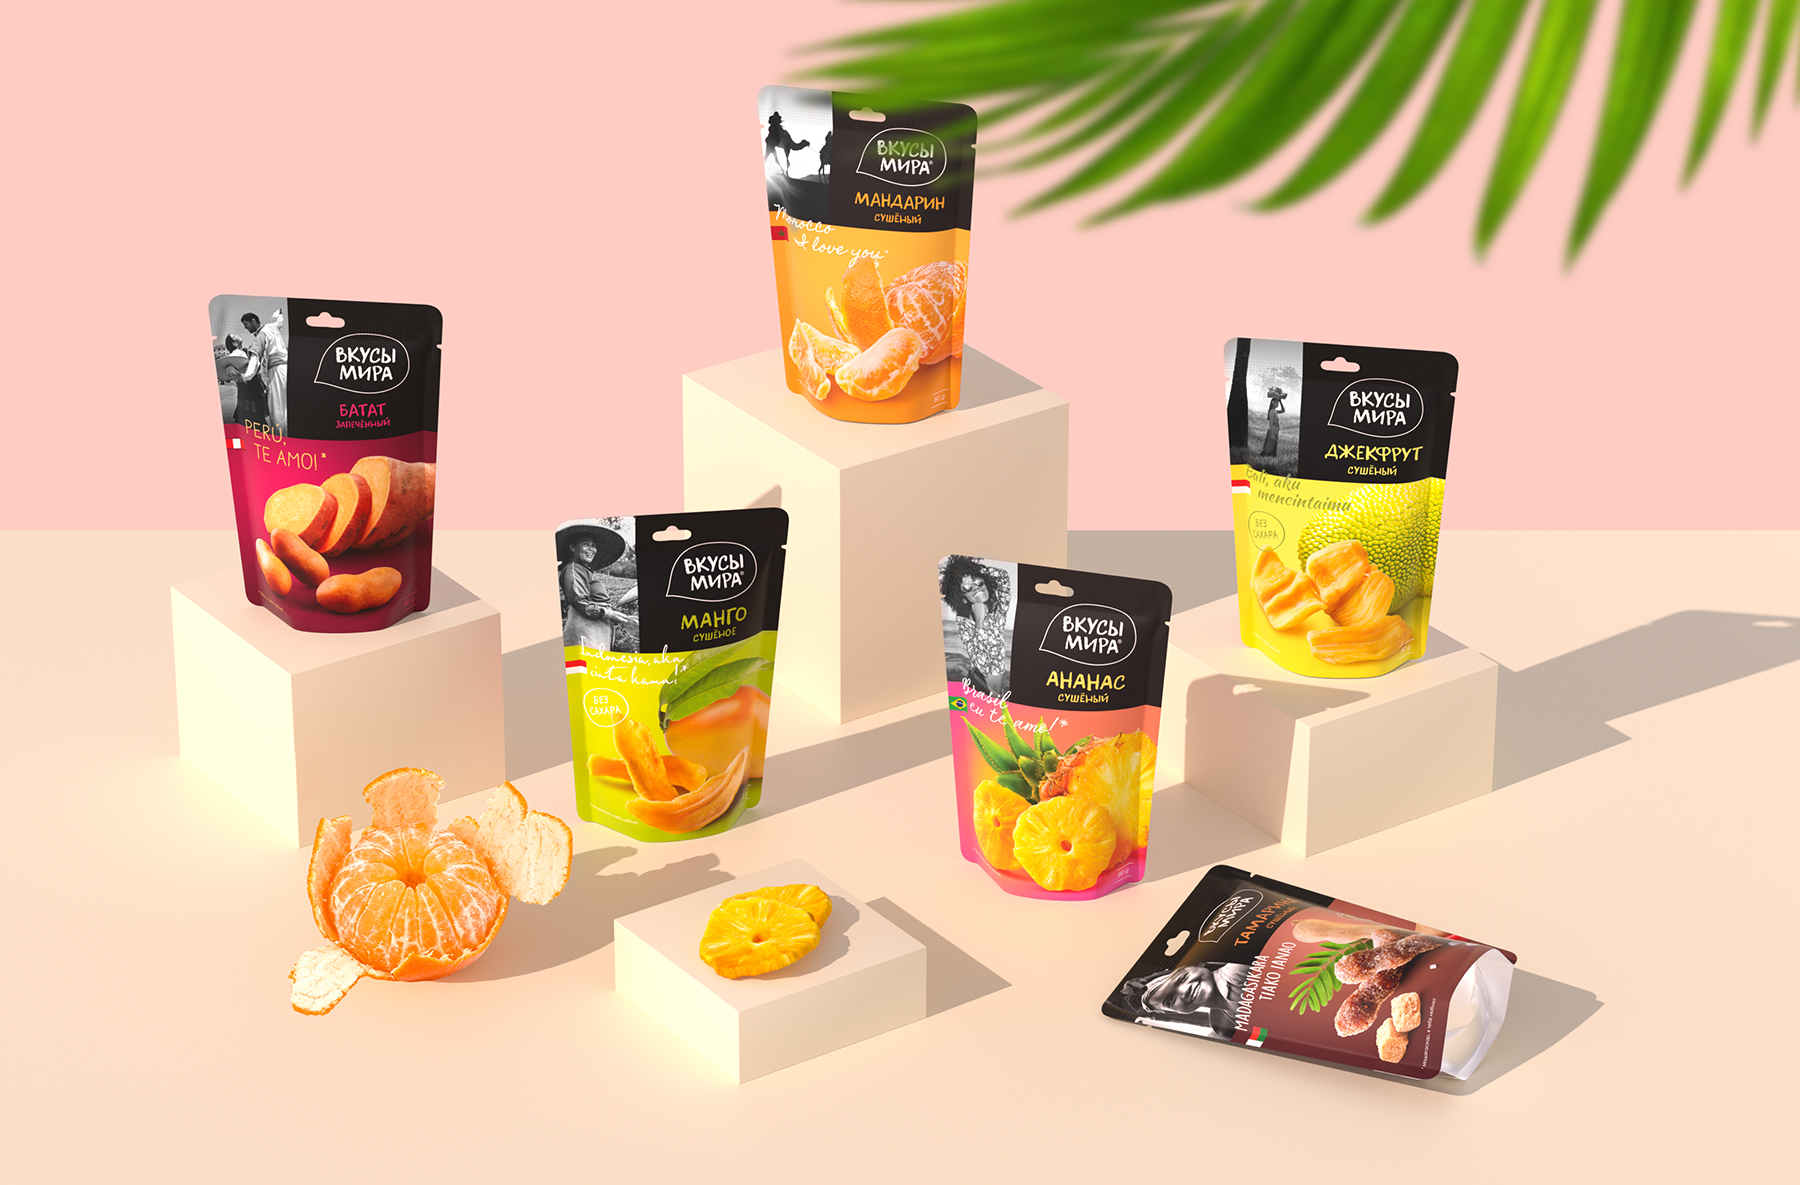 Branding Tastes of the World’s Exotic and Healthy Snacks